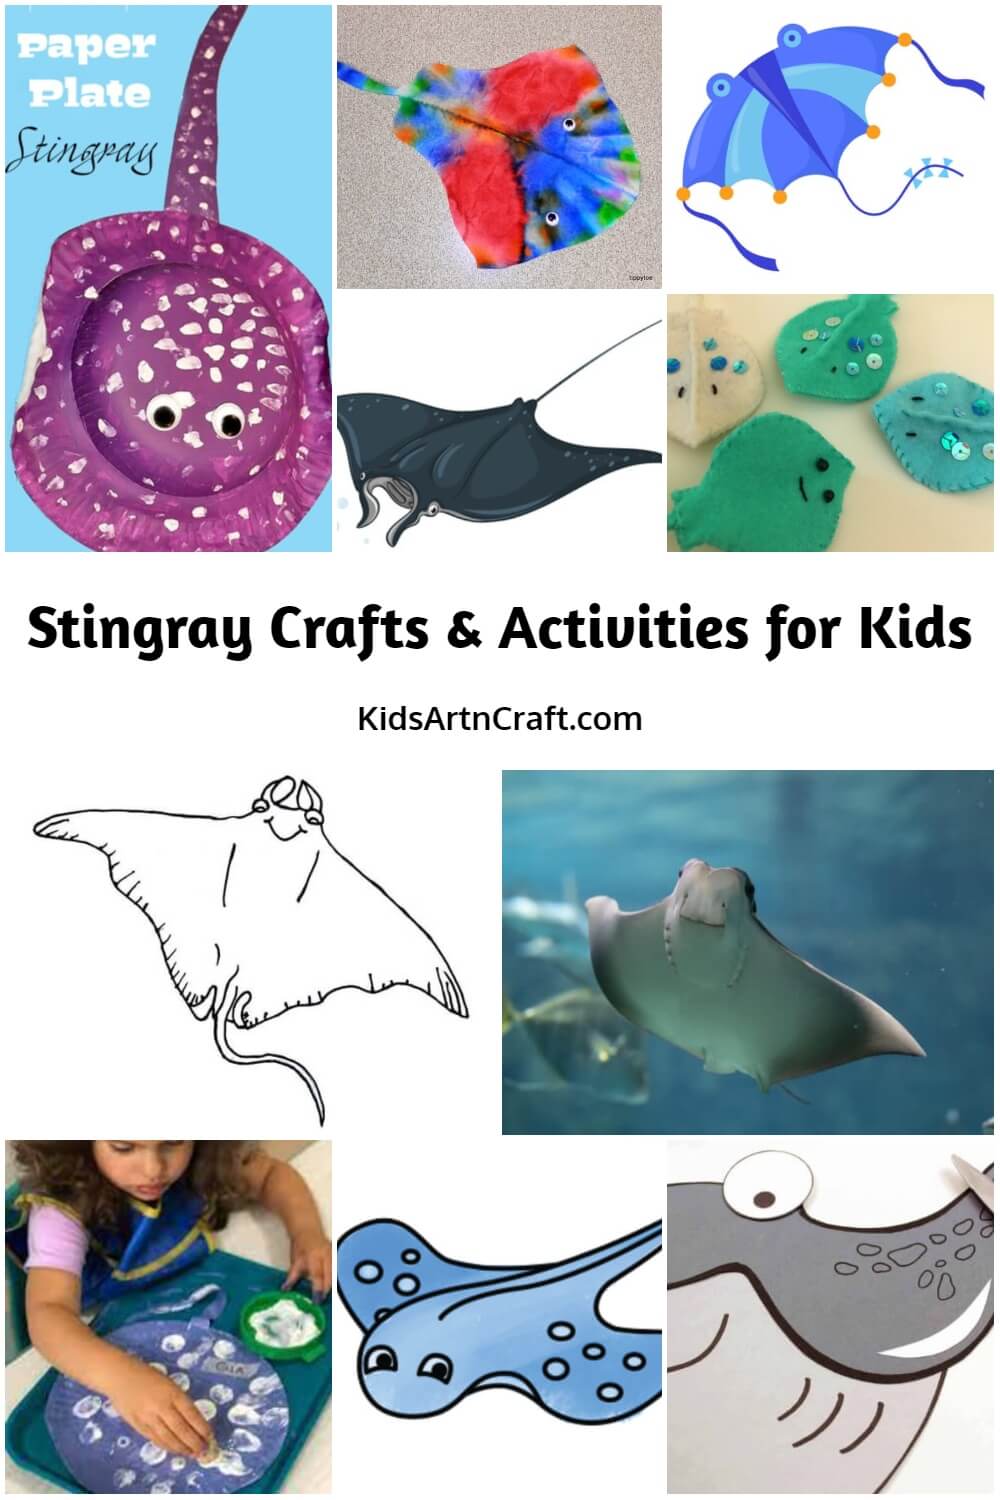 Stingray Crafts & Activities for Kids